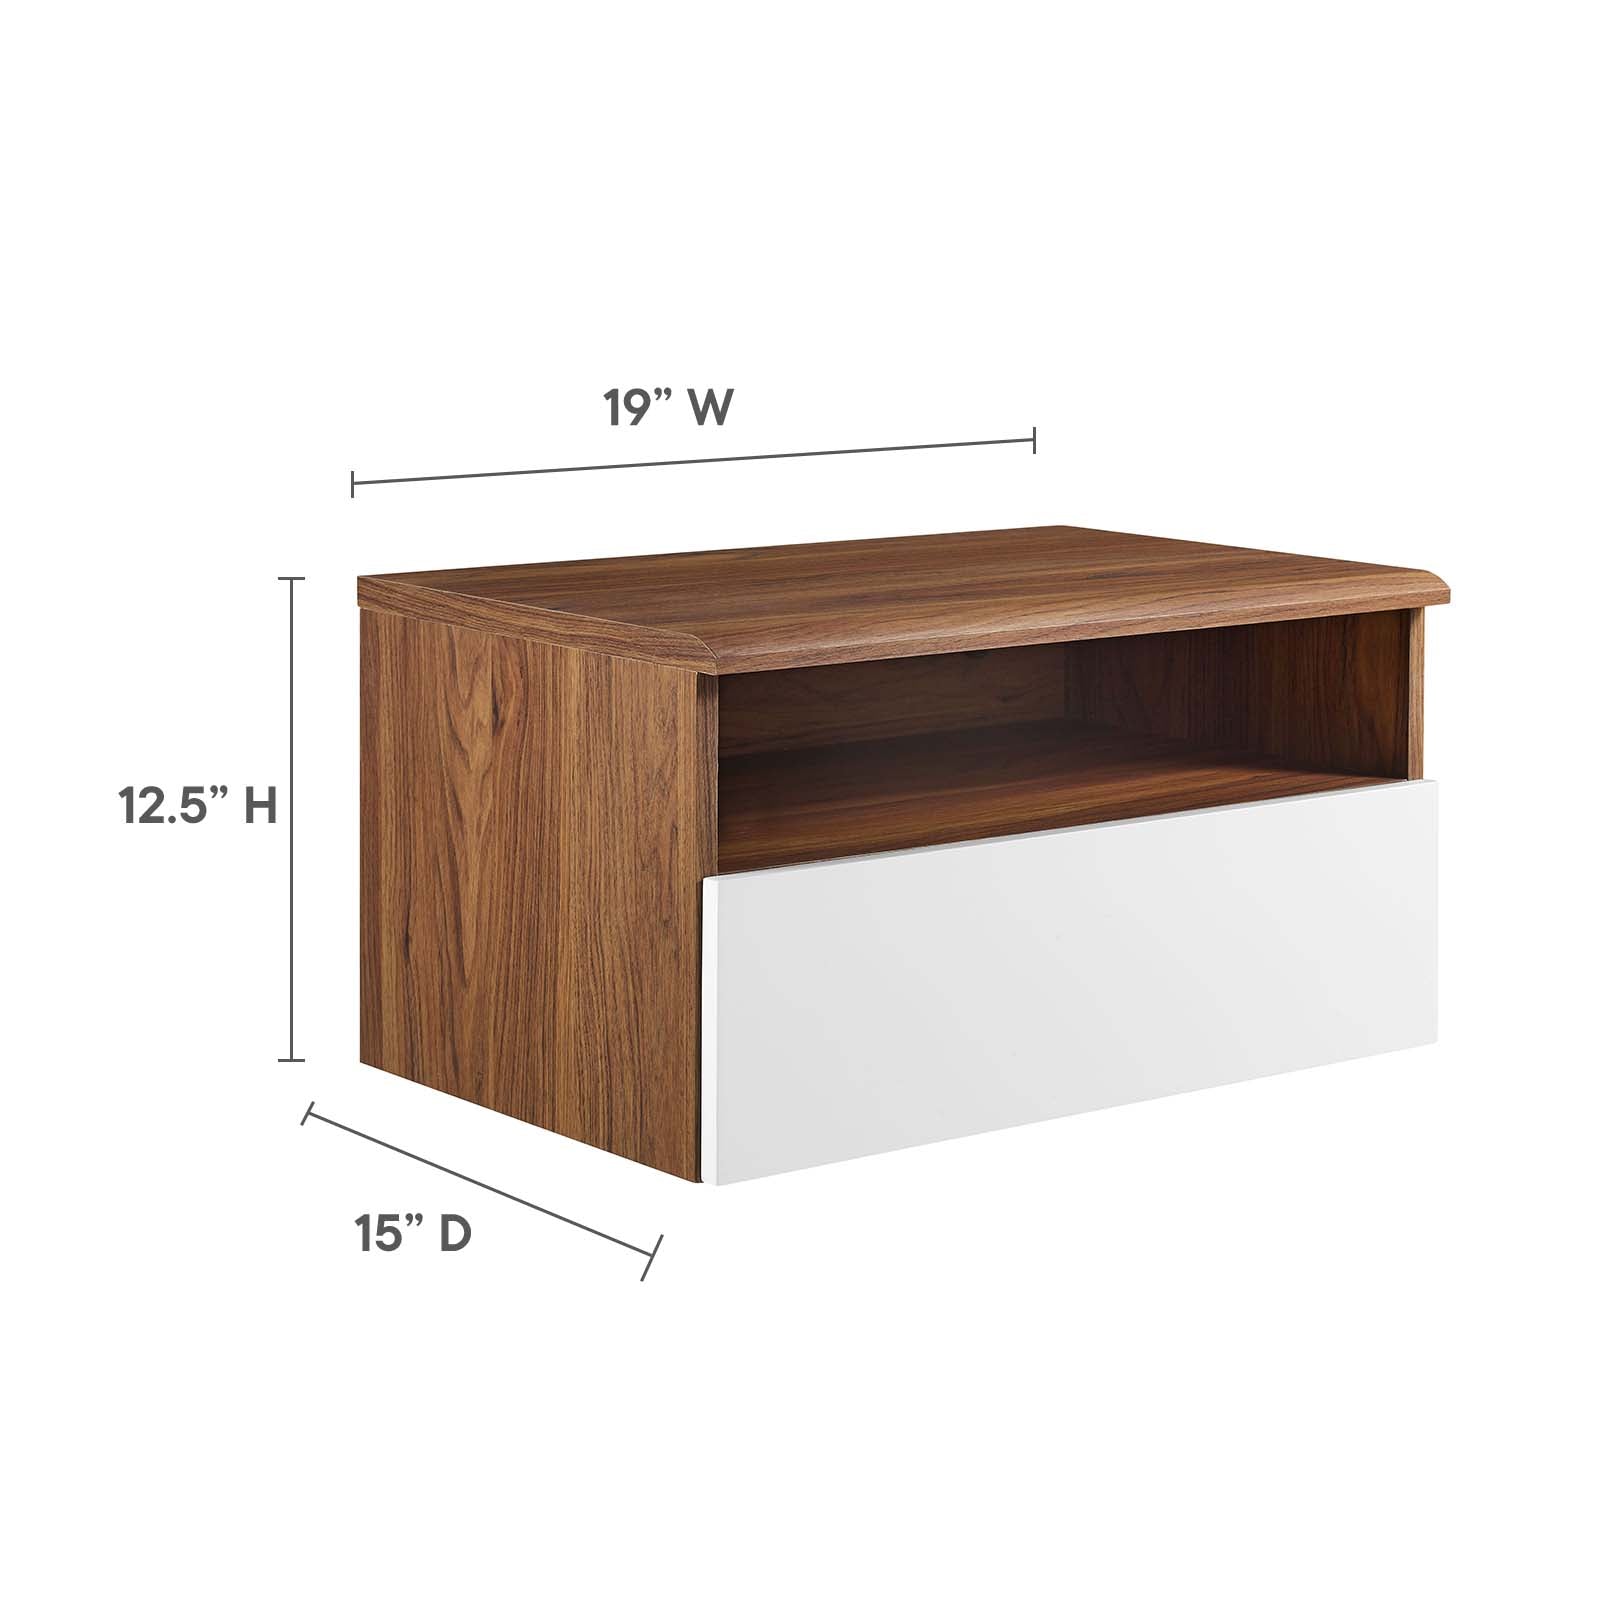 Envision Wall Mount Nightstand - East Shore Modern Home Furnishings